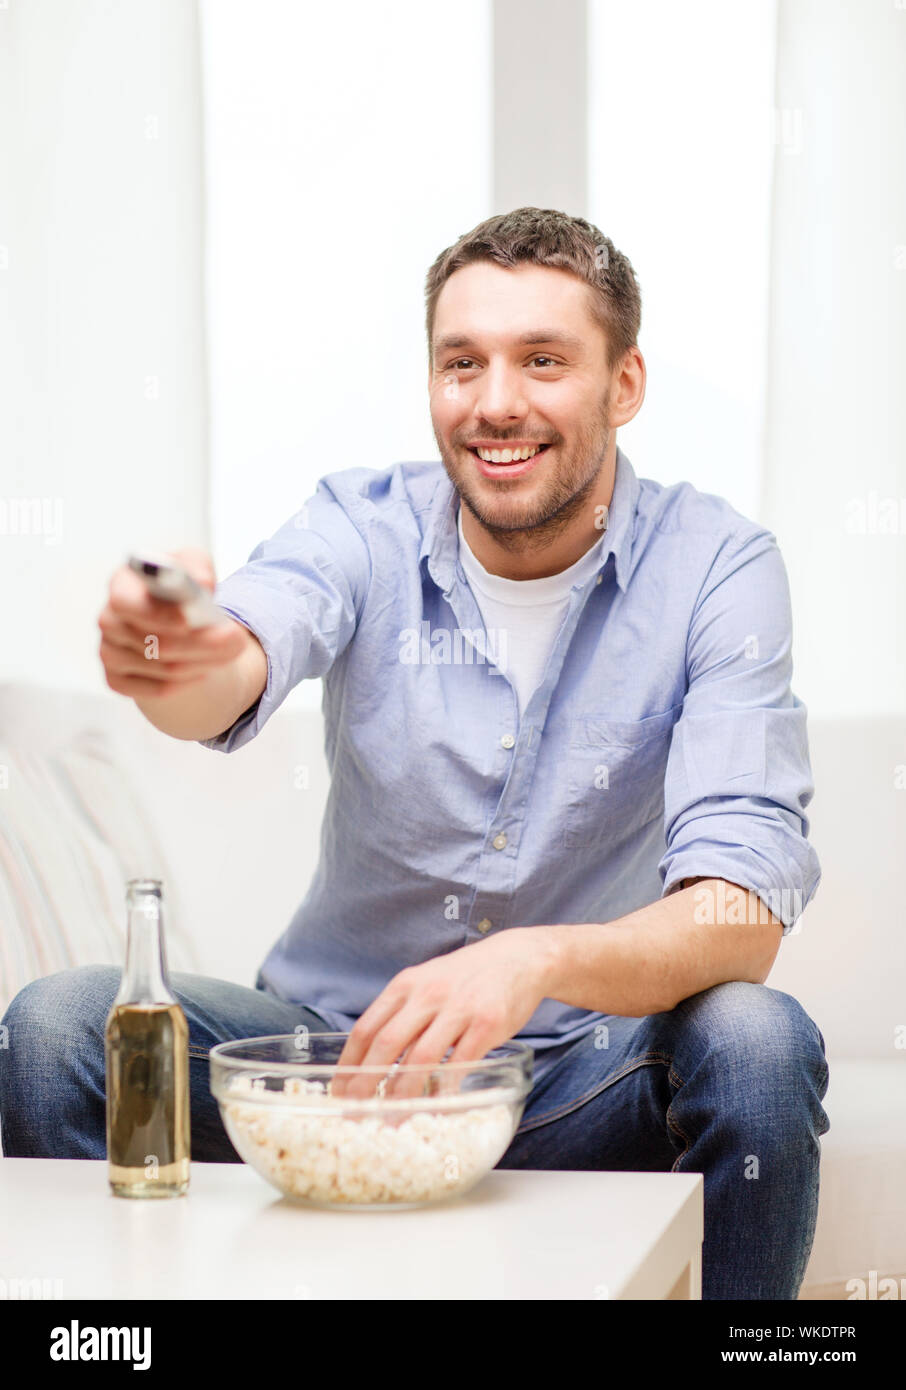 smiling man with tv remote control at home Stock Photo